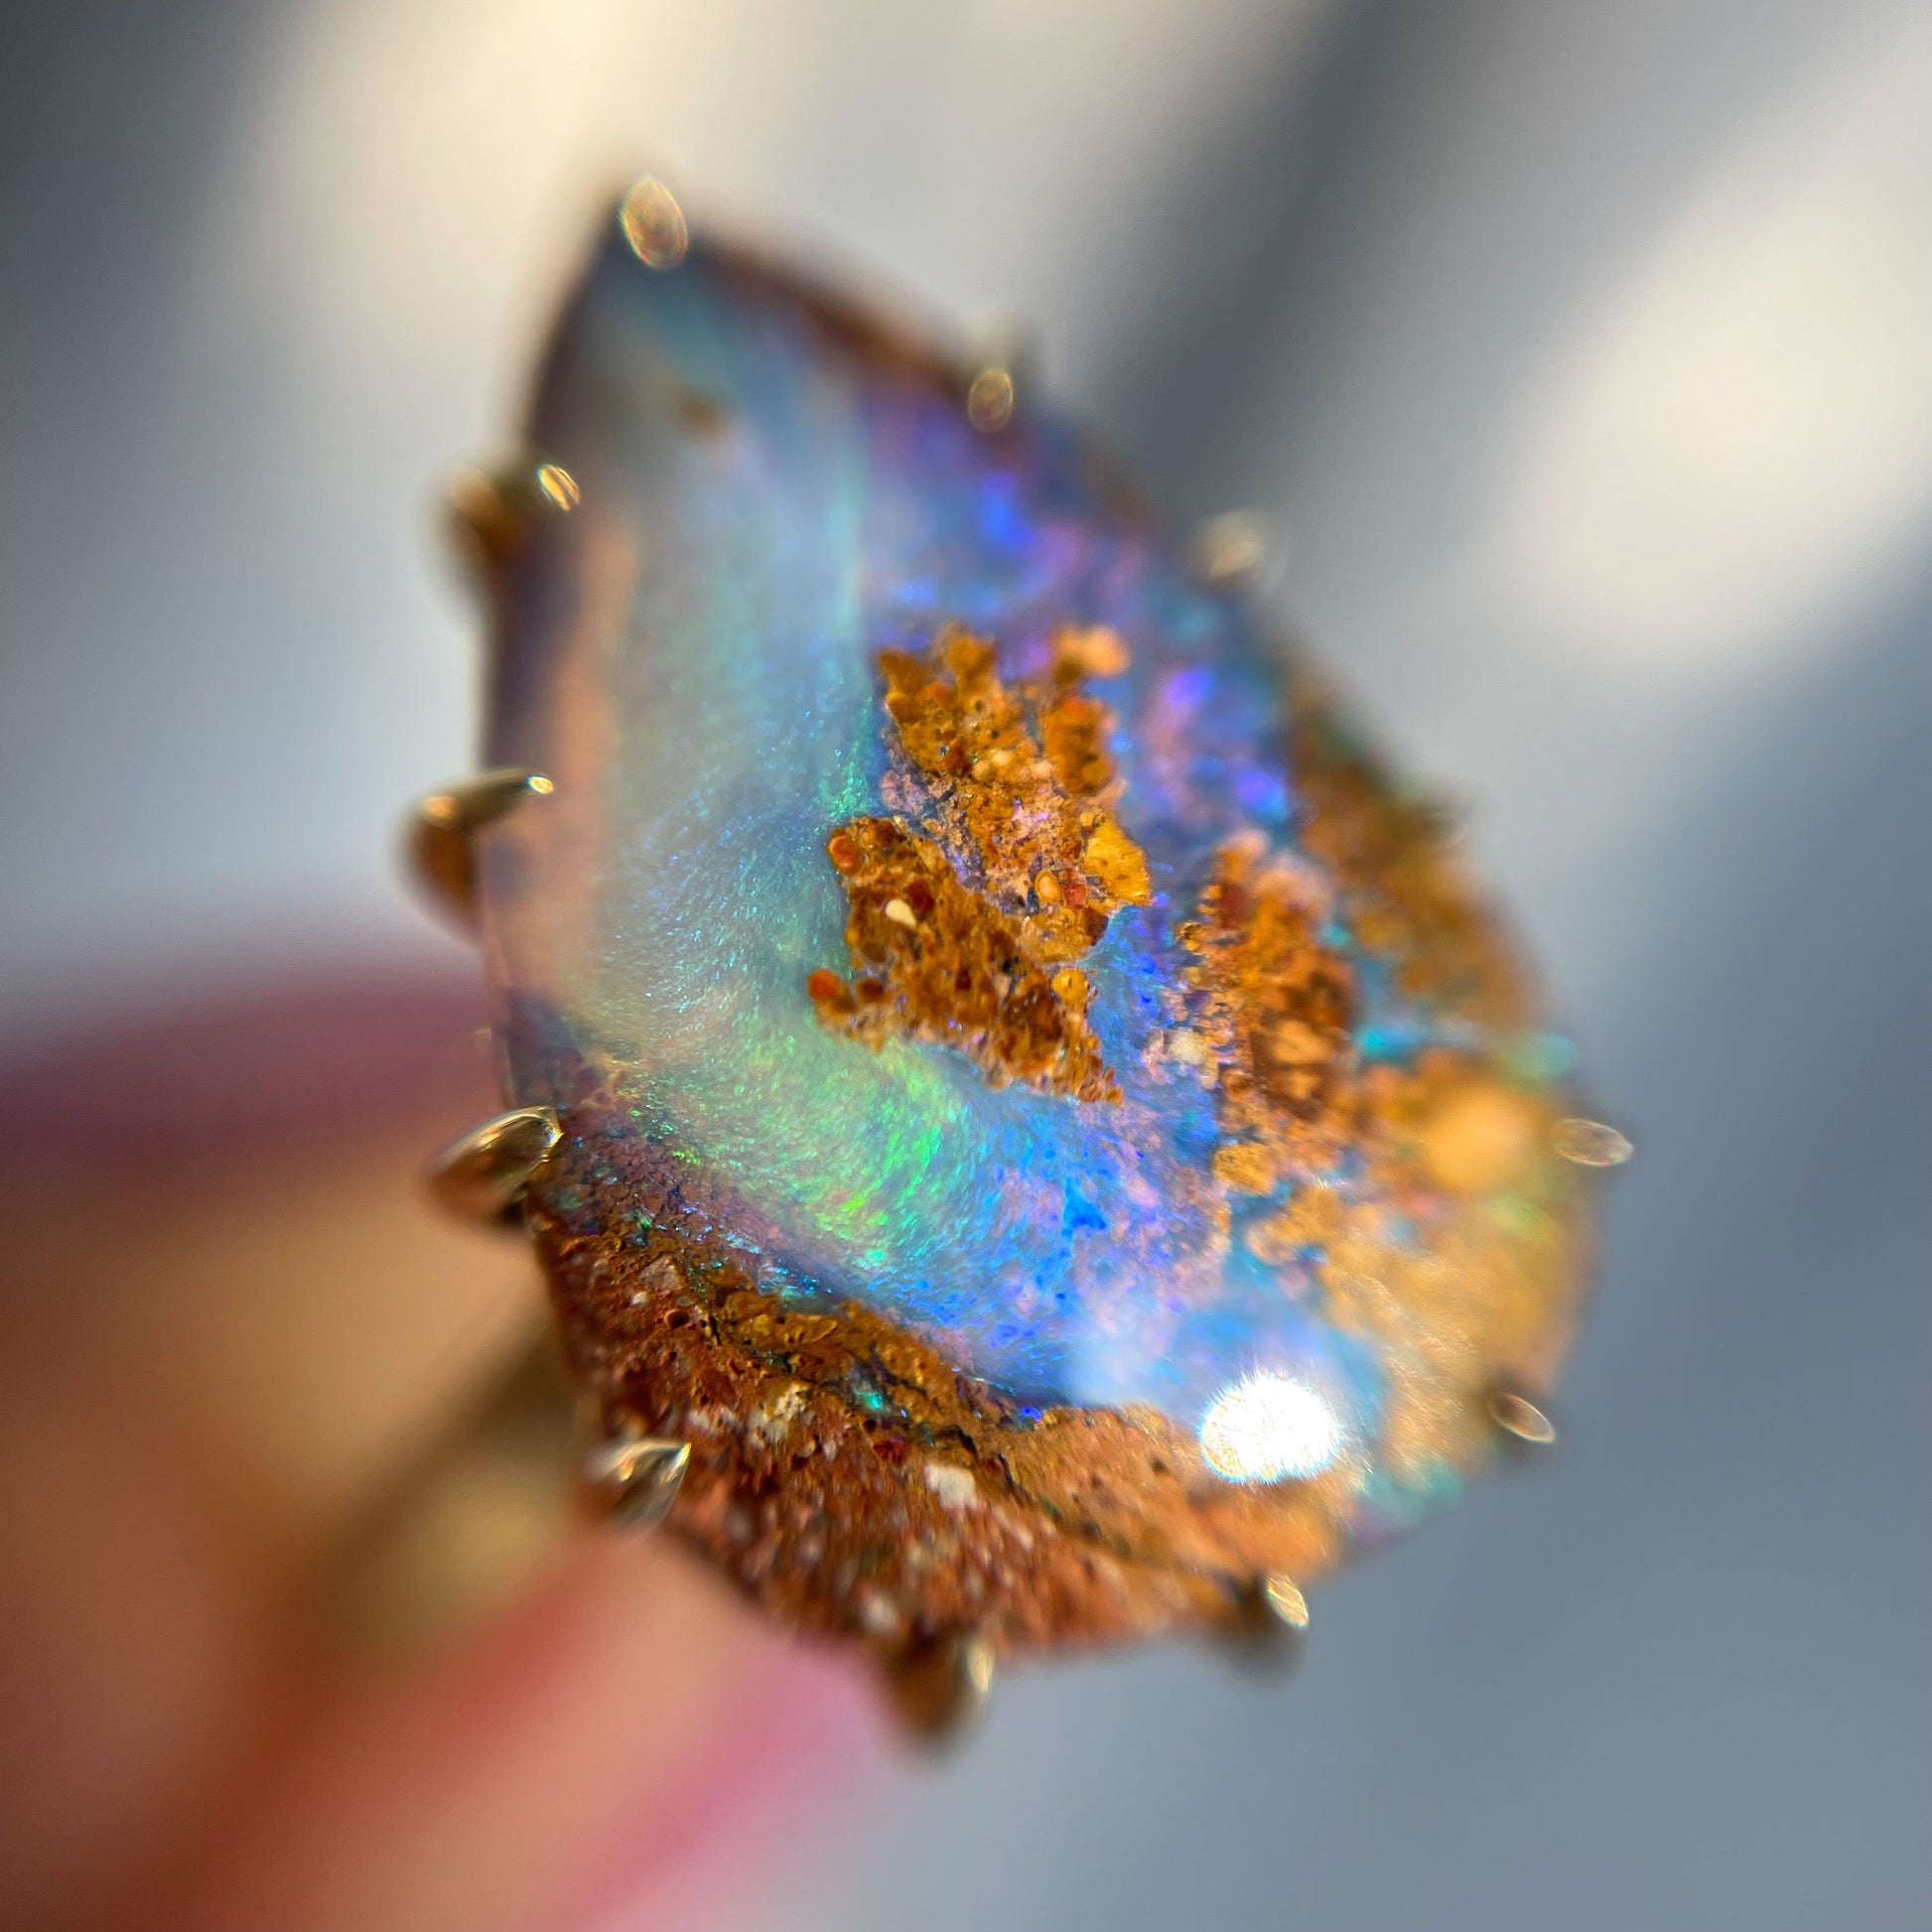 A NIXIN Jewelry Australian Opal Ring shot under magnification. A beautiful blue, green and purple opal ring.